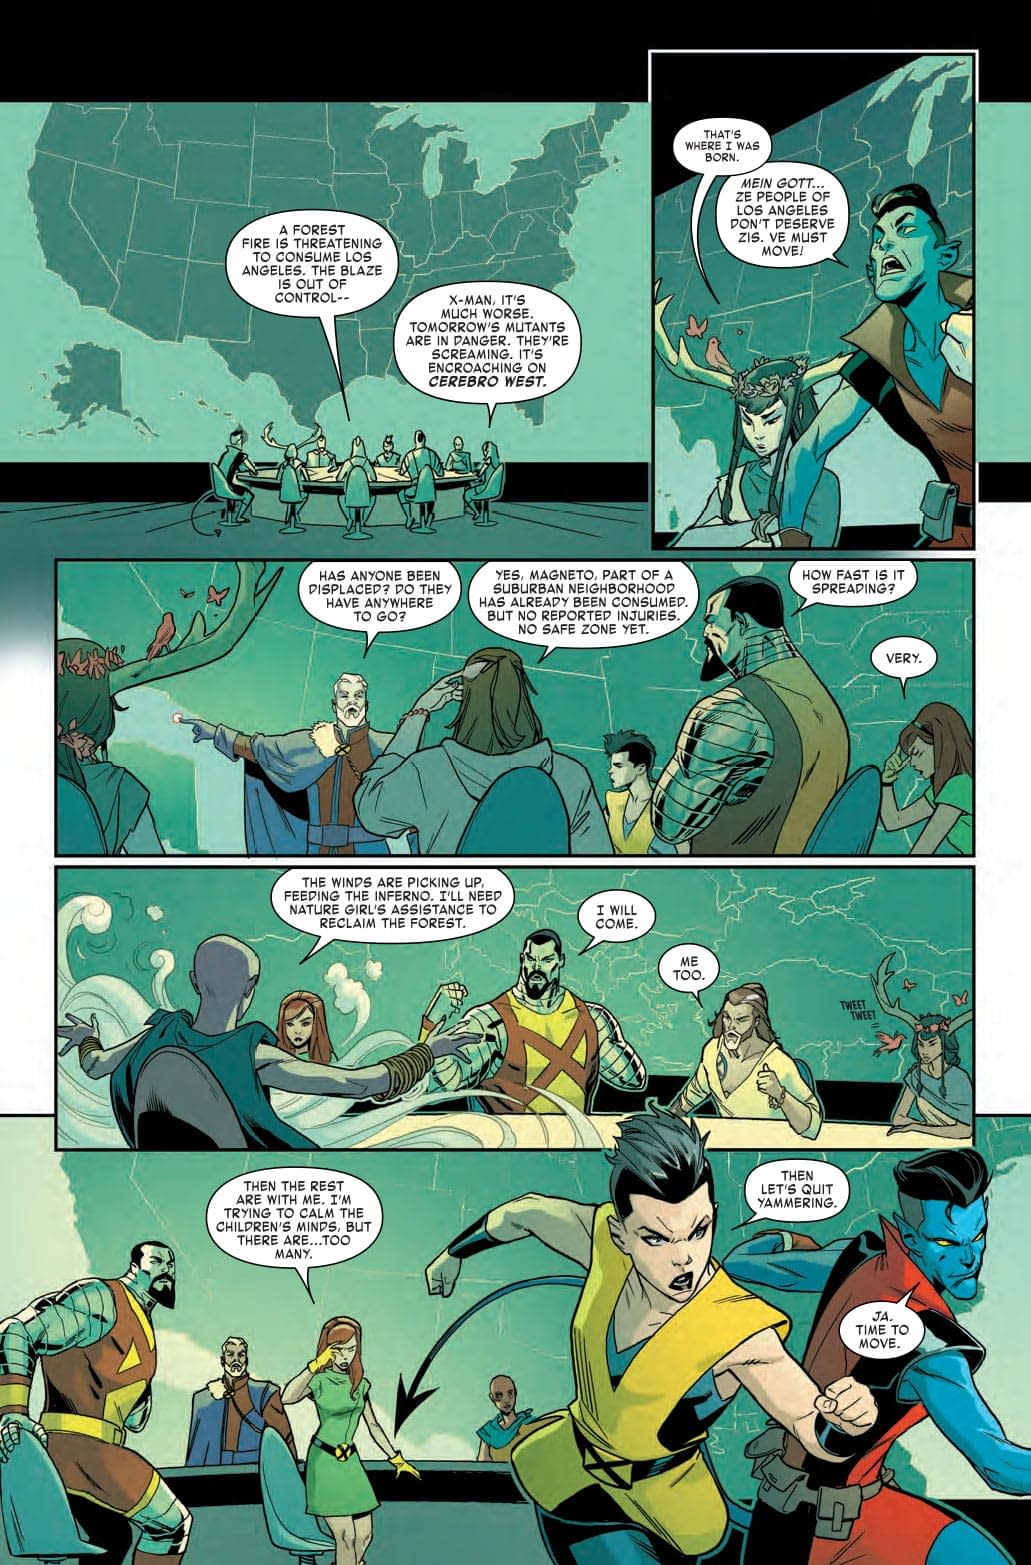 Nate Grey is a Master Retconner in Next Week's Age of X-Man: Marvelous X-Men #1